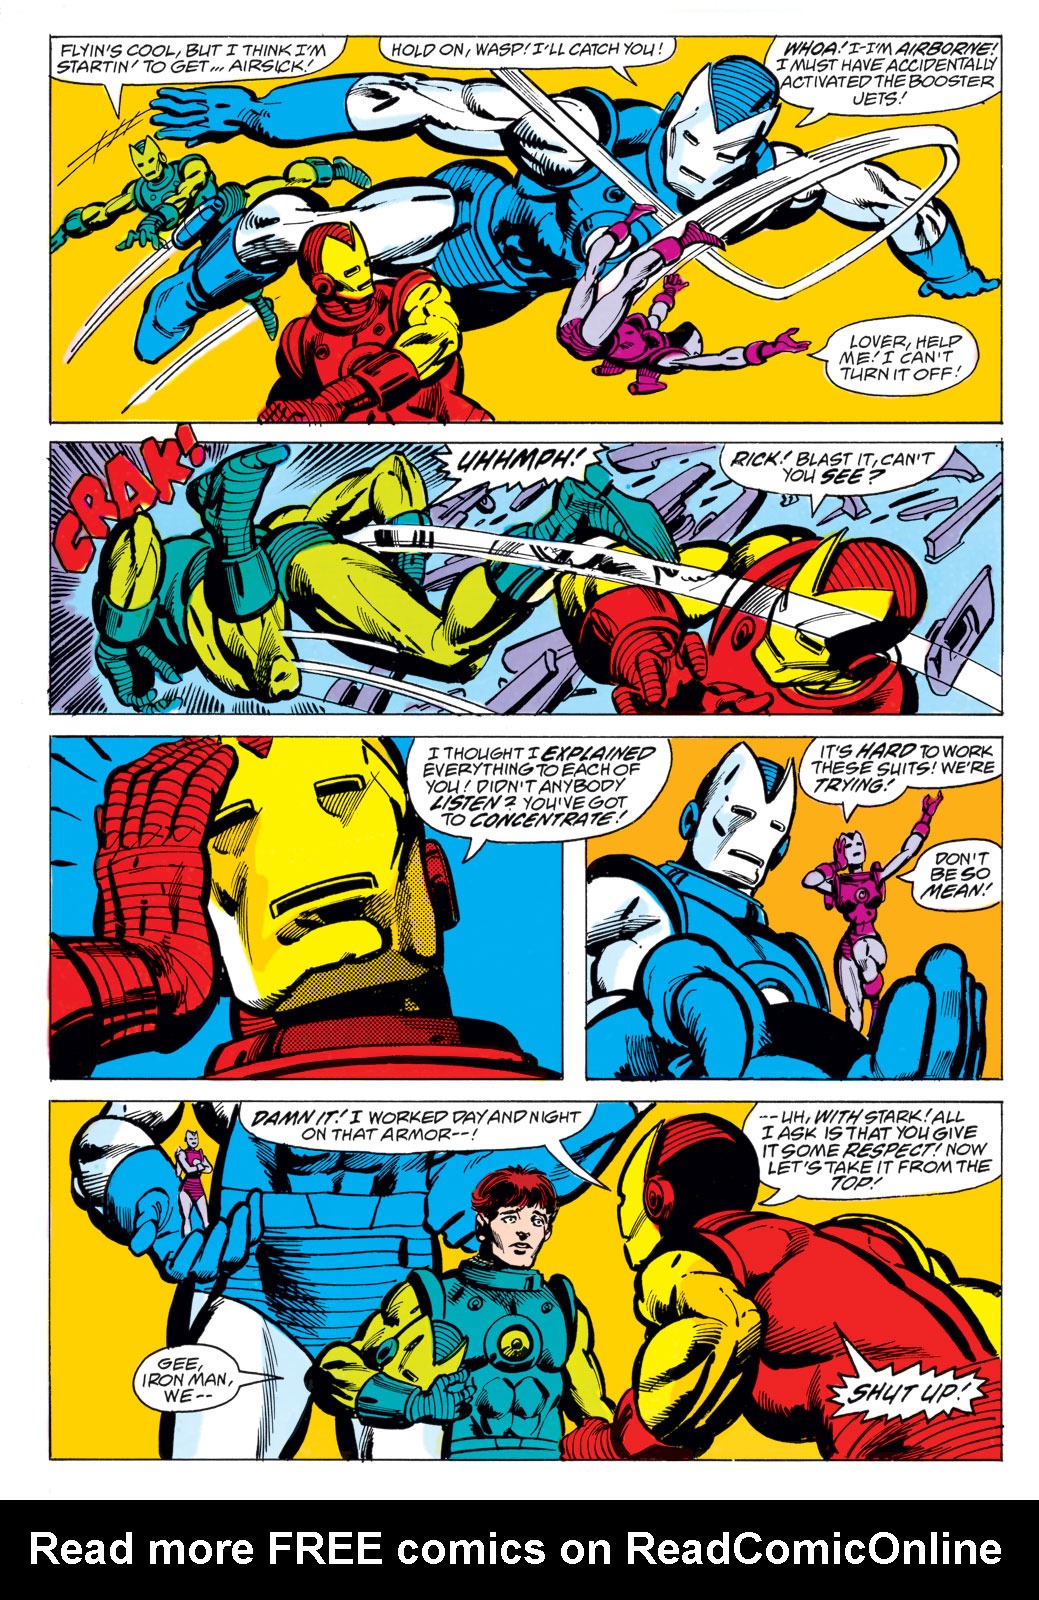 What If? (1977) issue 3 - The Avengers had never been - Page 13